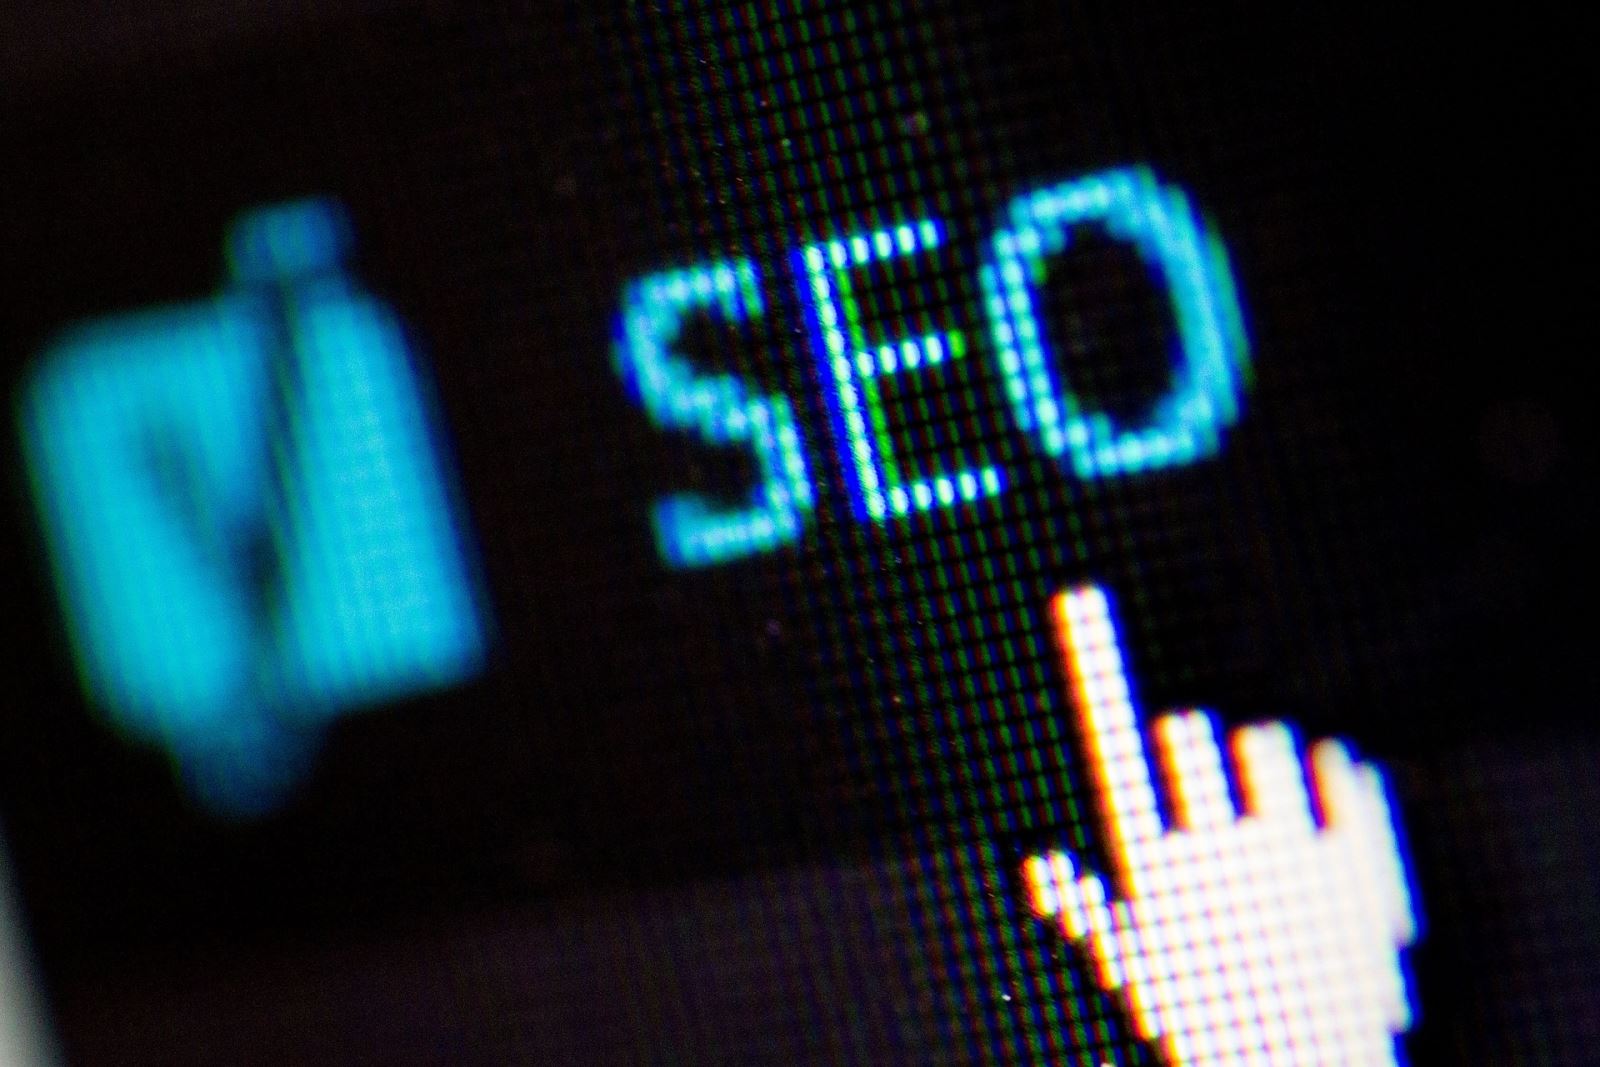 search intent in seo